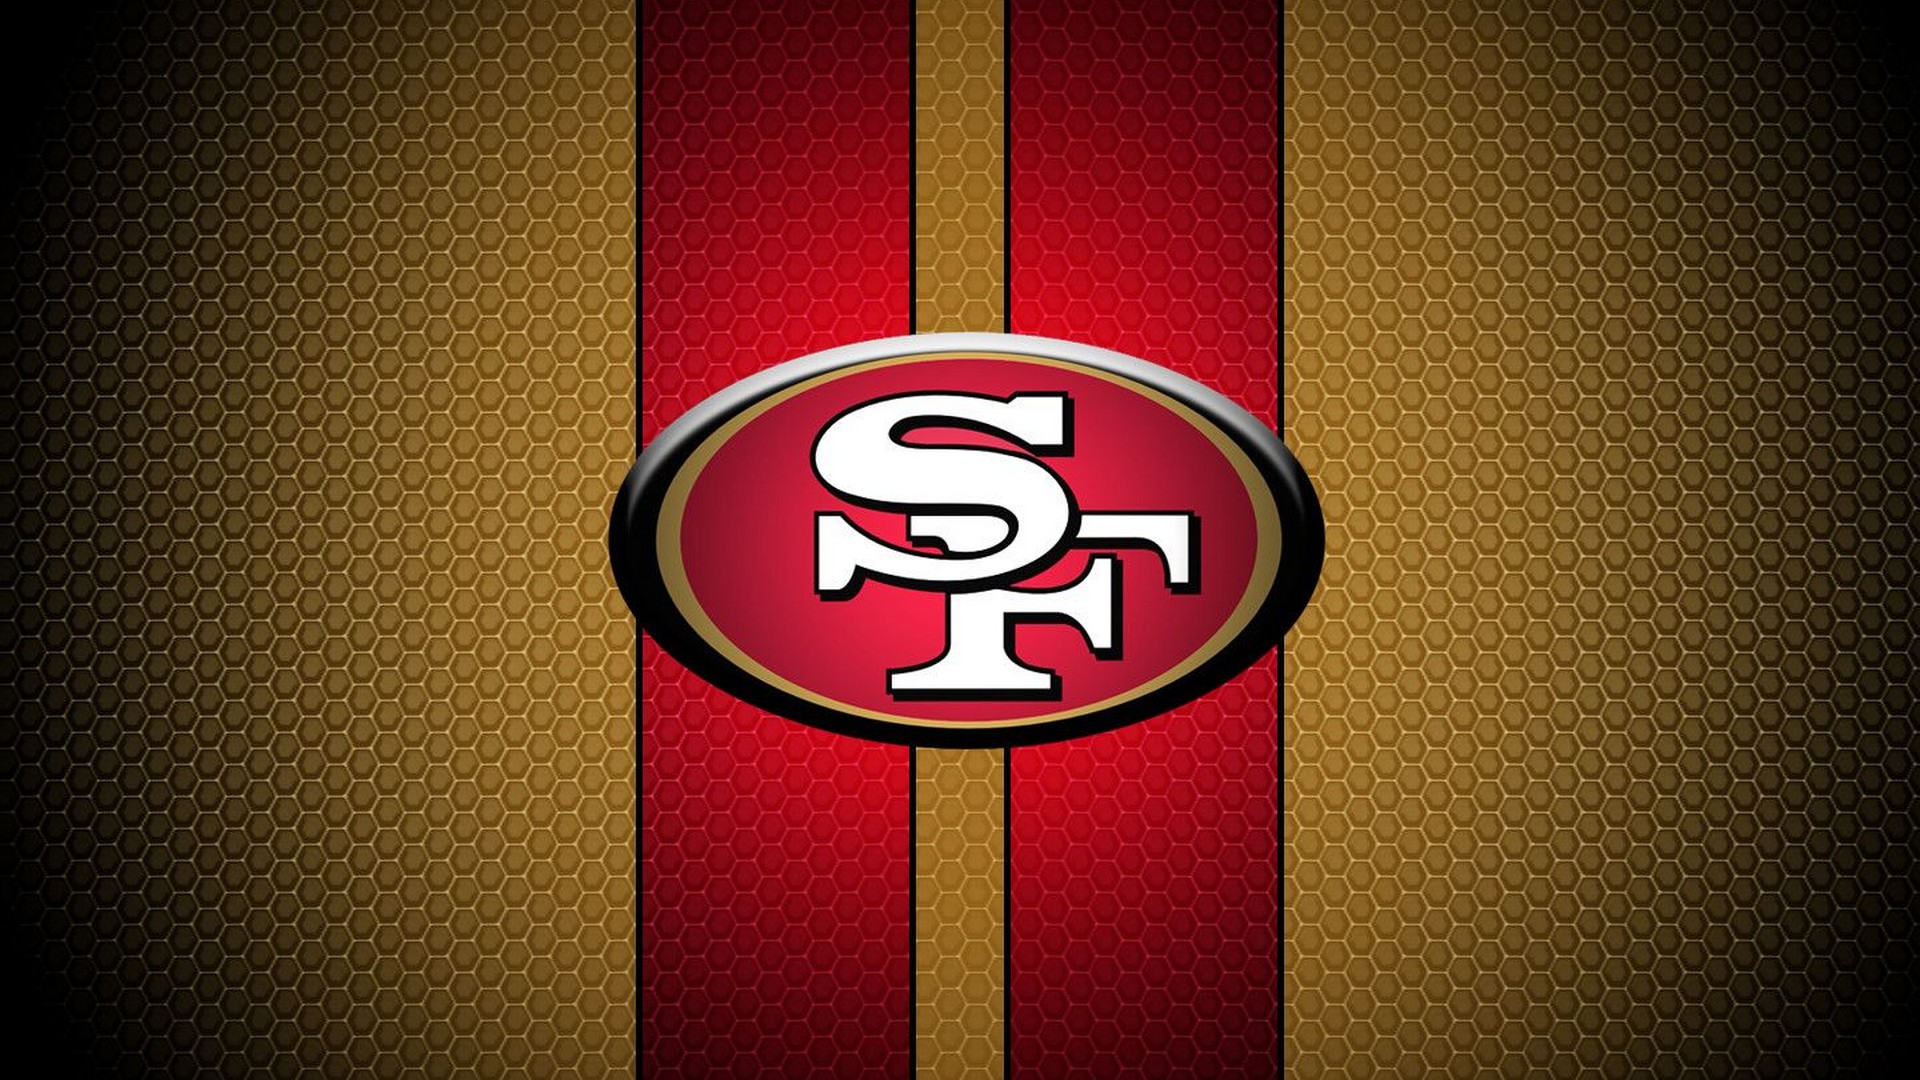 San Francisco 49ers For Pc Wallpaper With High-resolution - San Francisco 49ers Logo - HD Wallpaper 